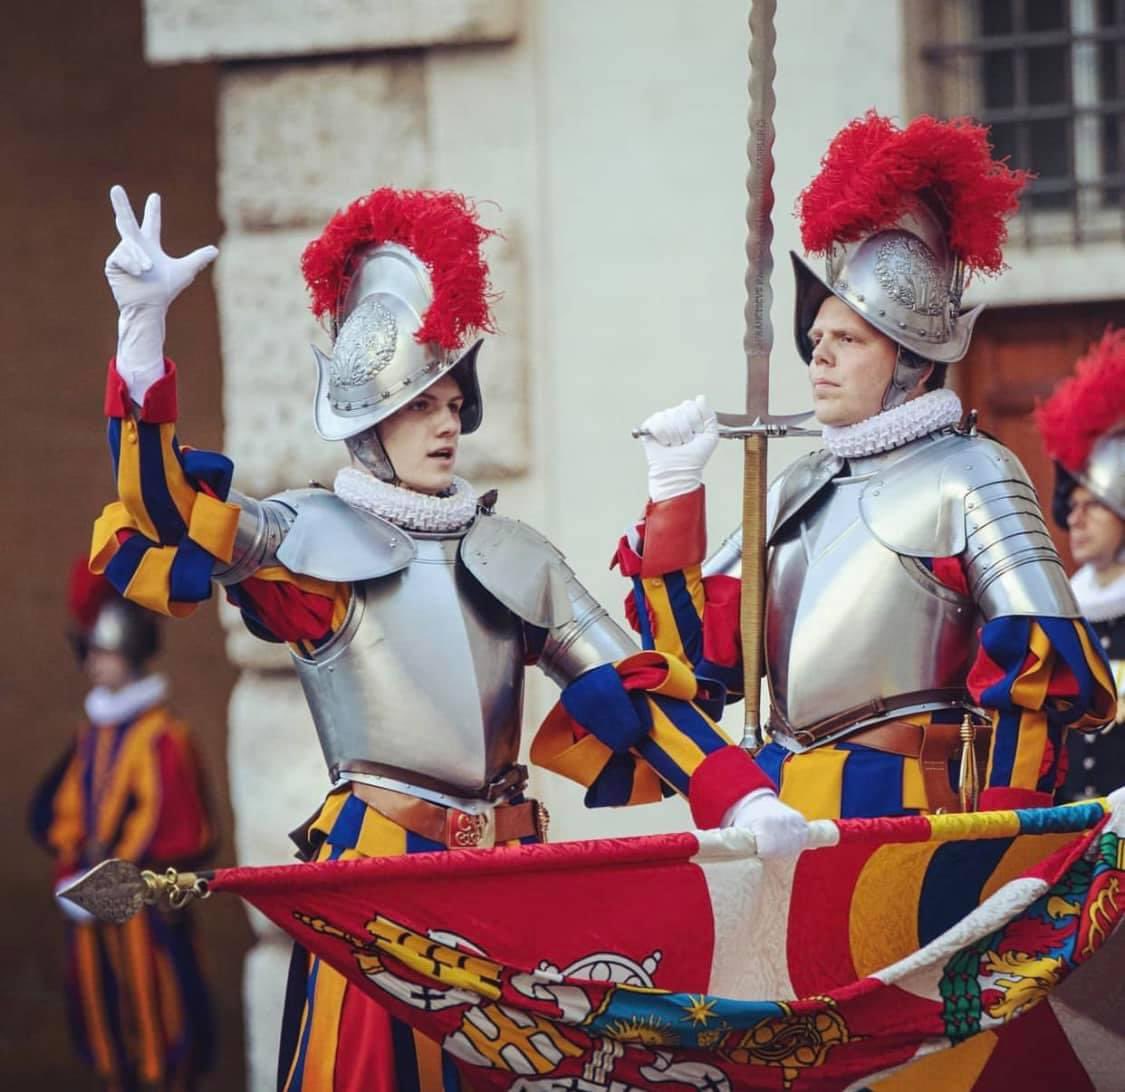 May 6th is the day for the swearing-in of the new Swiss Guards at the Vatican. The solemn ceremony is held in memory of the 147 guardsmen who died defending the Vatican and the Holy Father during the Sack of Rome in 1527. Prayers for all my friends in the Pontifical Swiss Guard.